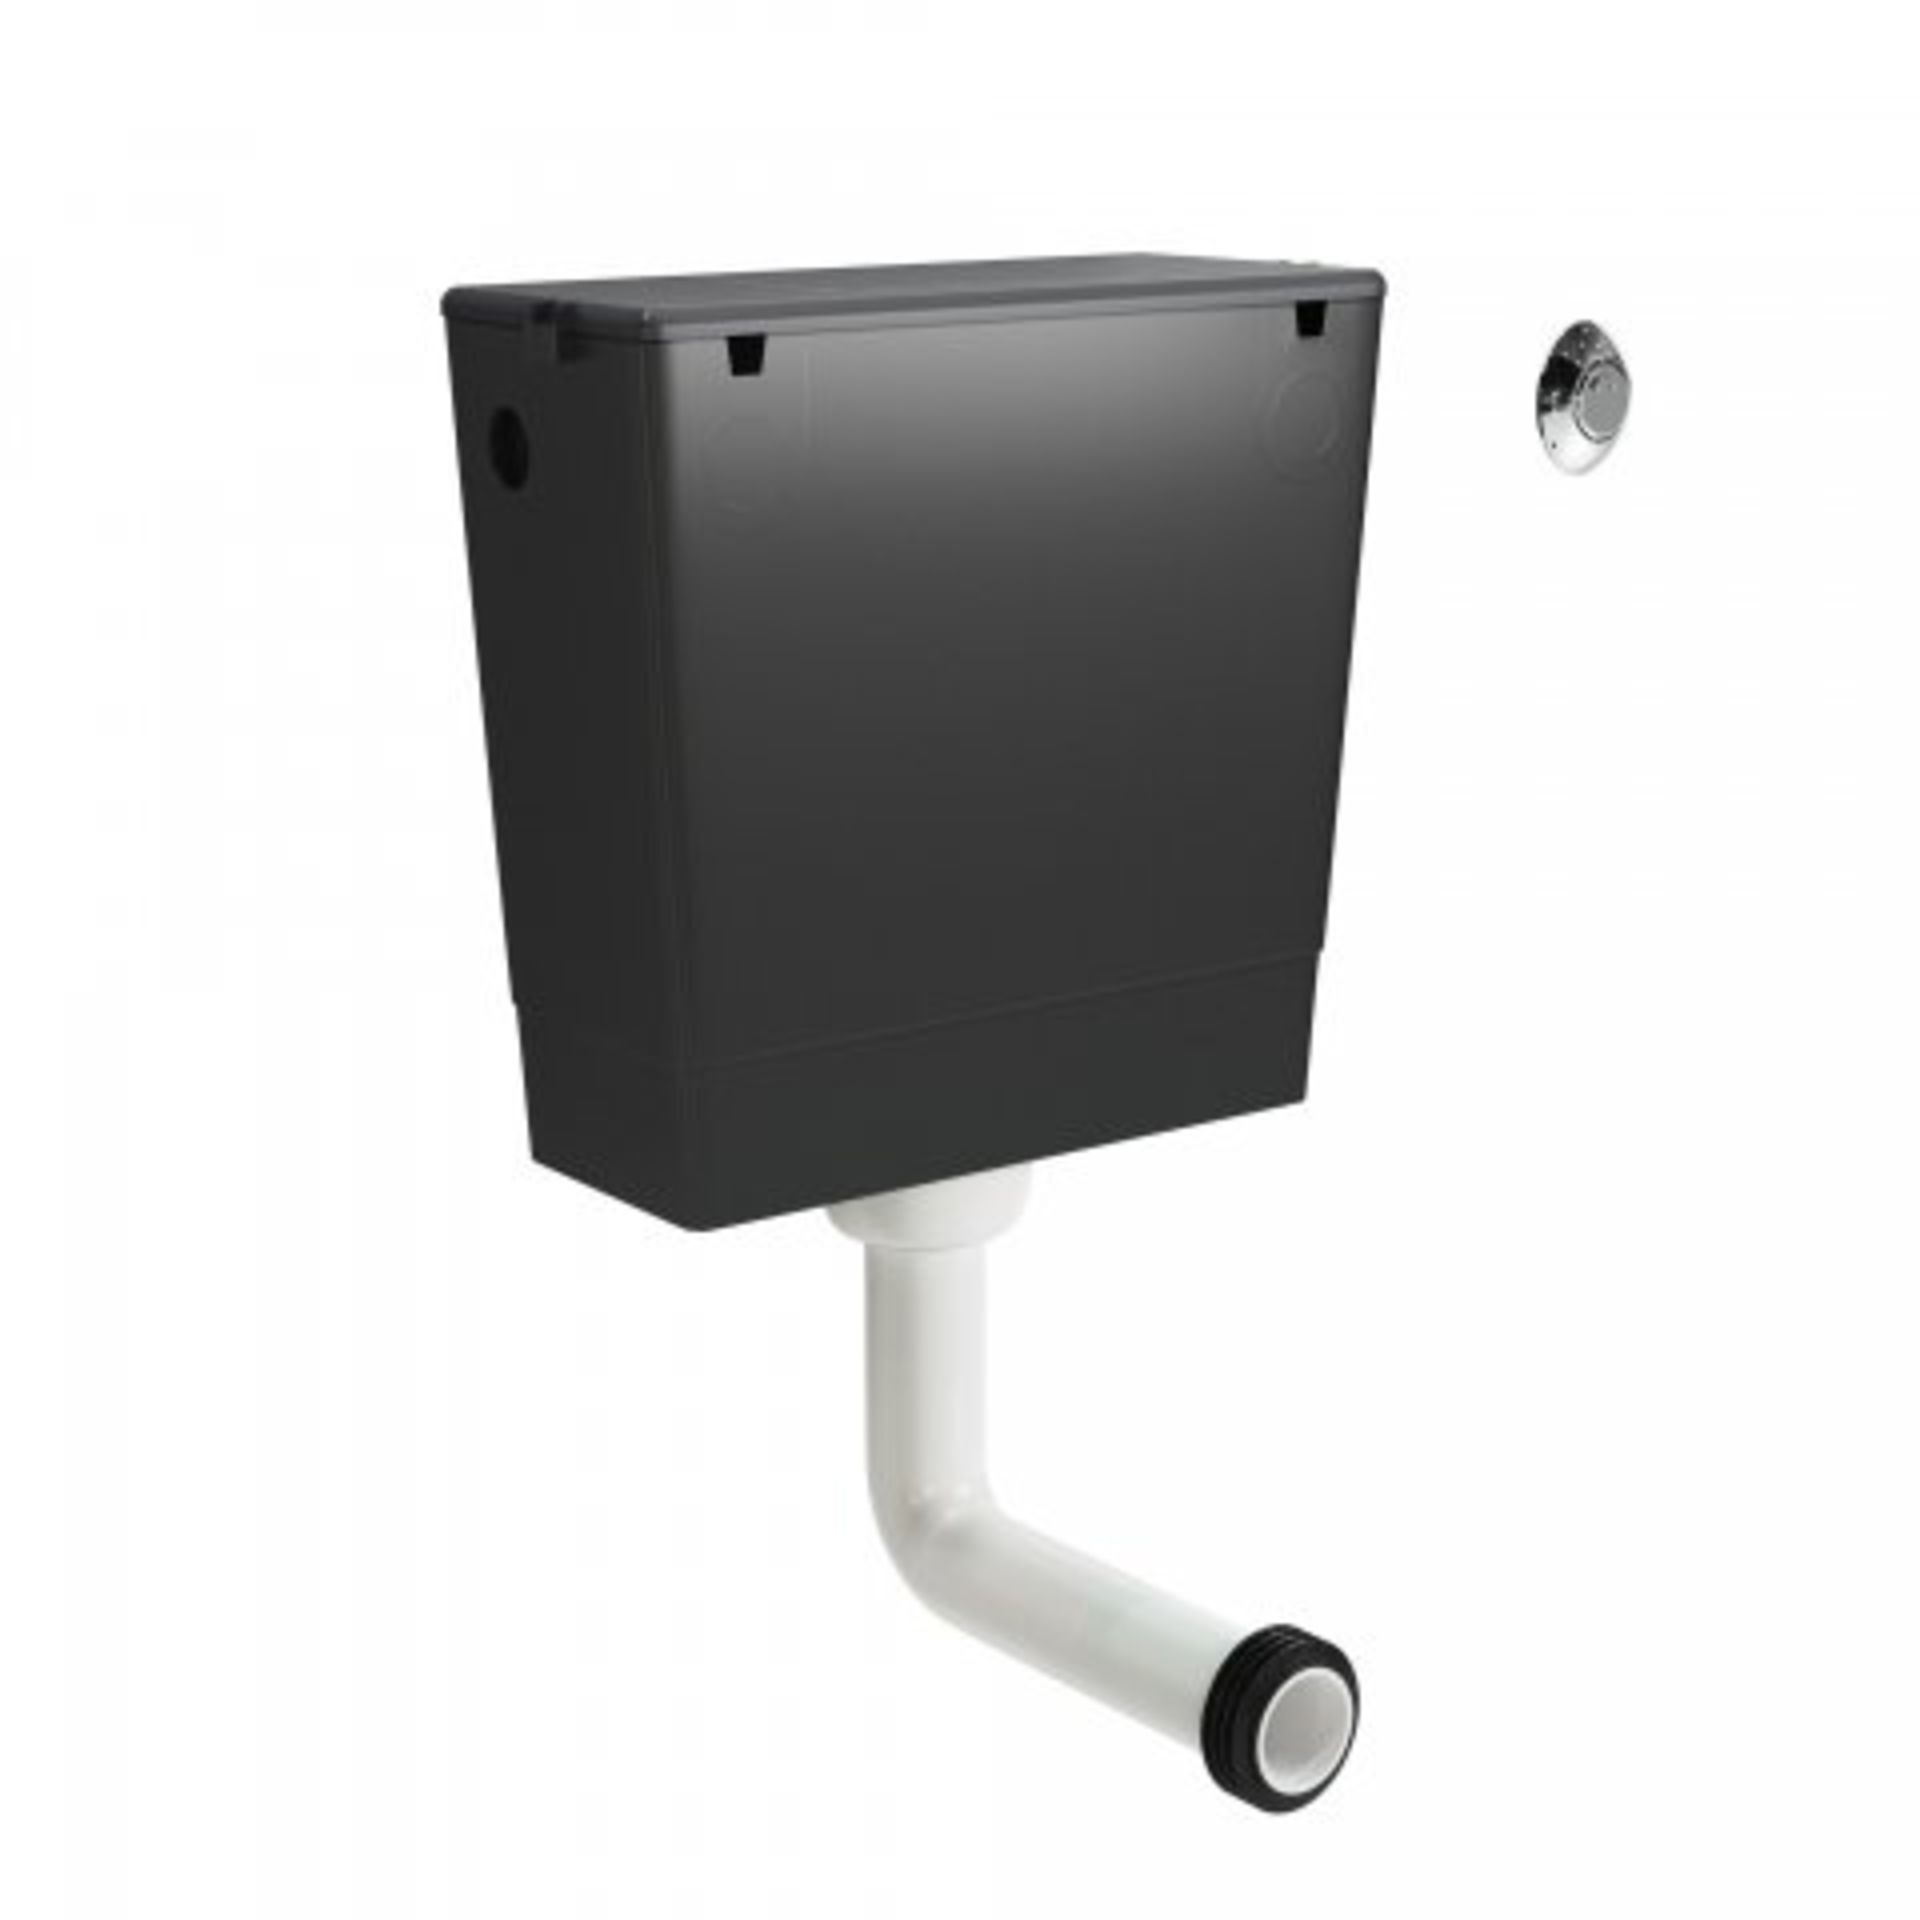 (M62) Wirquin Dual Flush Concealed Cistern This Dual Flush Concealed Cistern is designed to uphold a